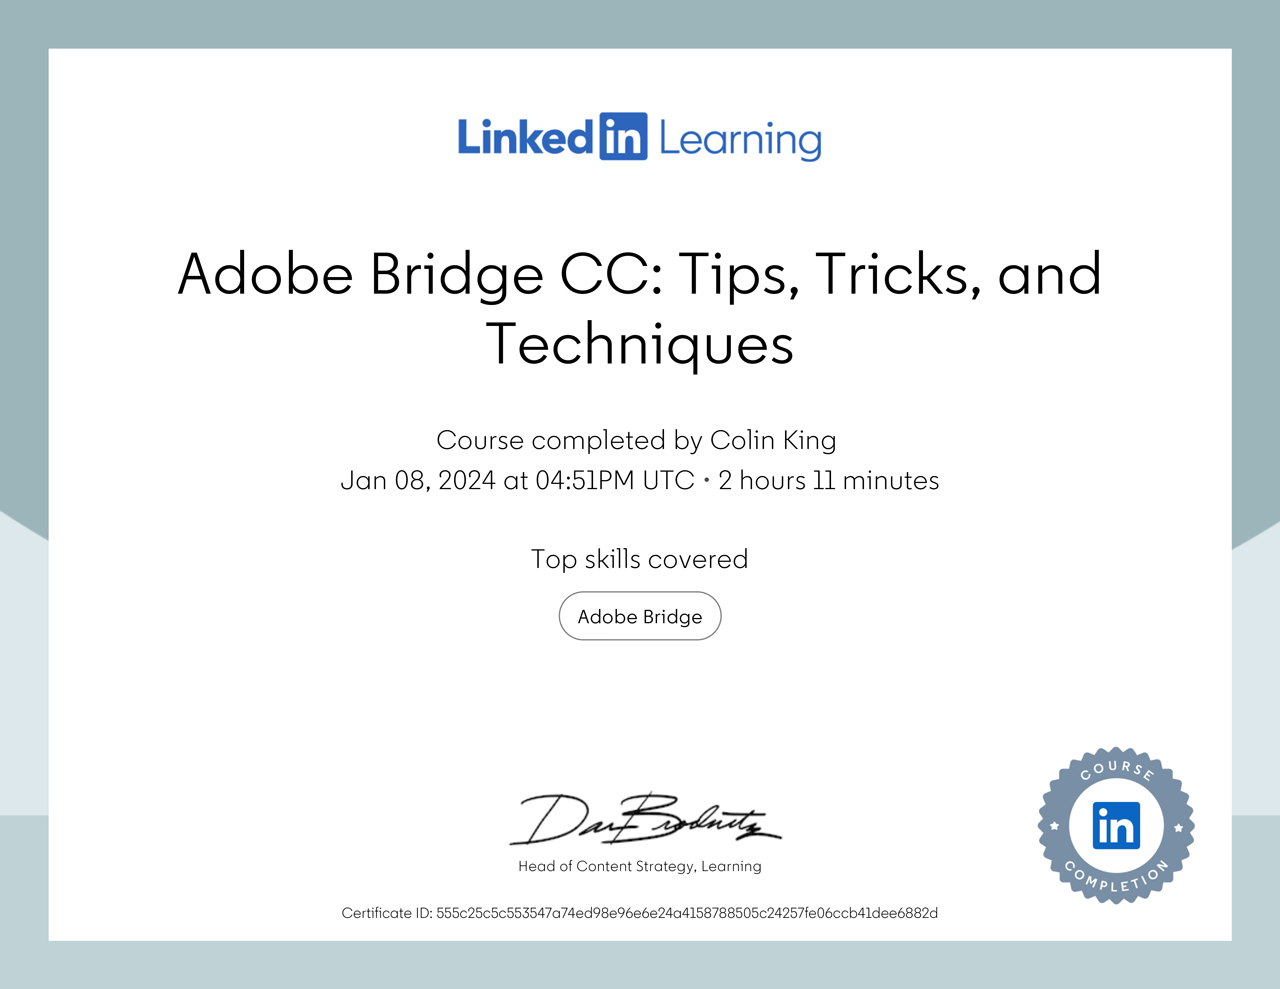 Certificate Of Completion Adobe-Bridge CC Tips Tricks and Techniques